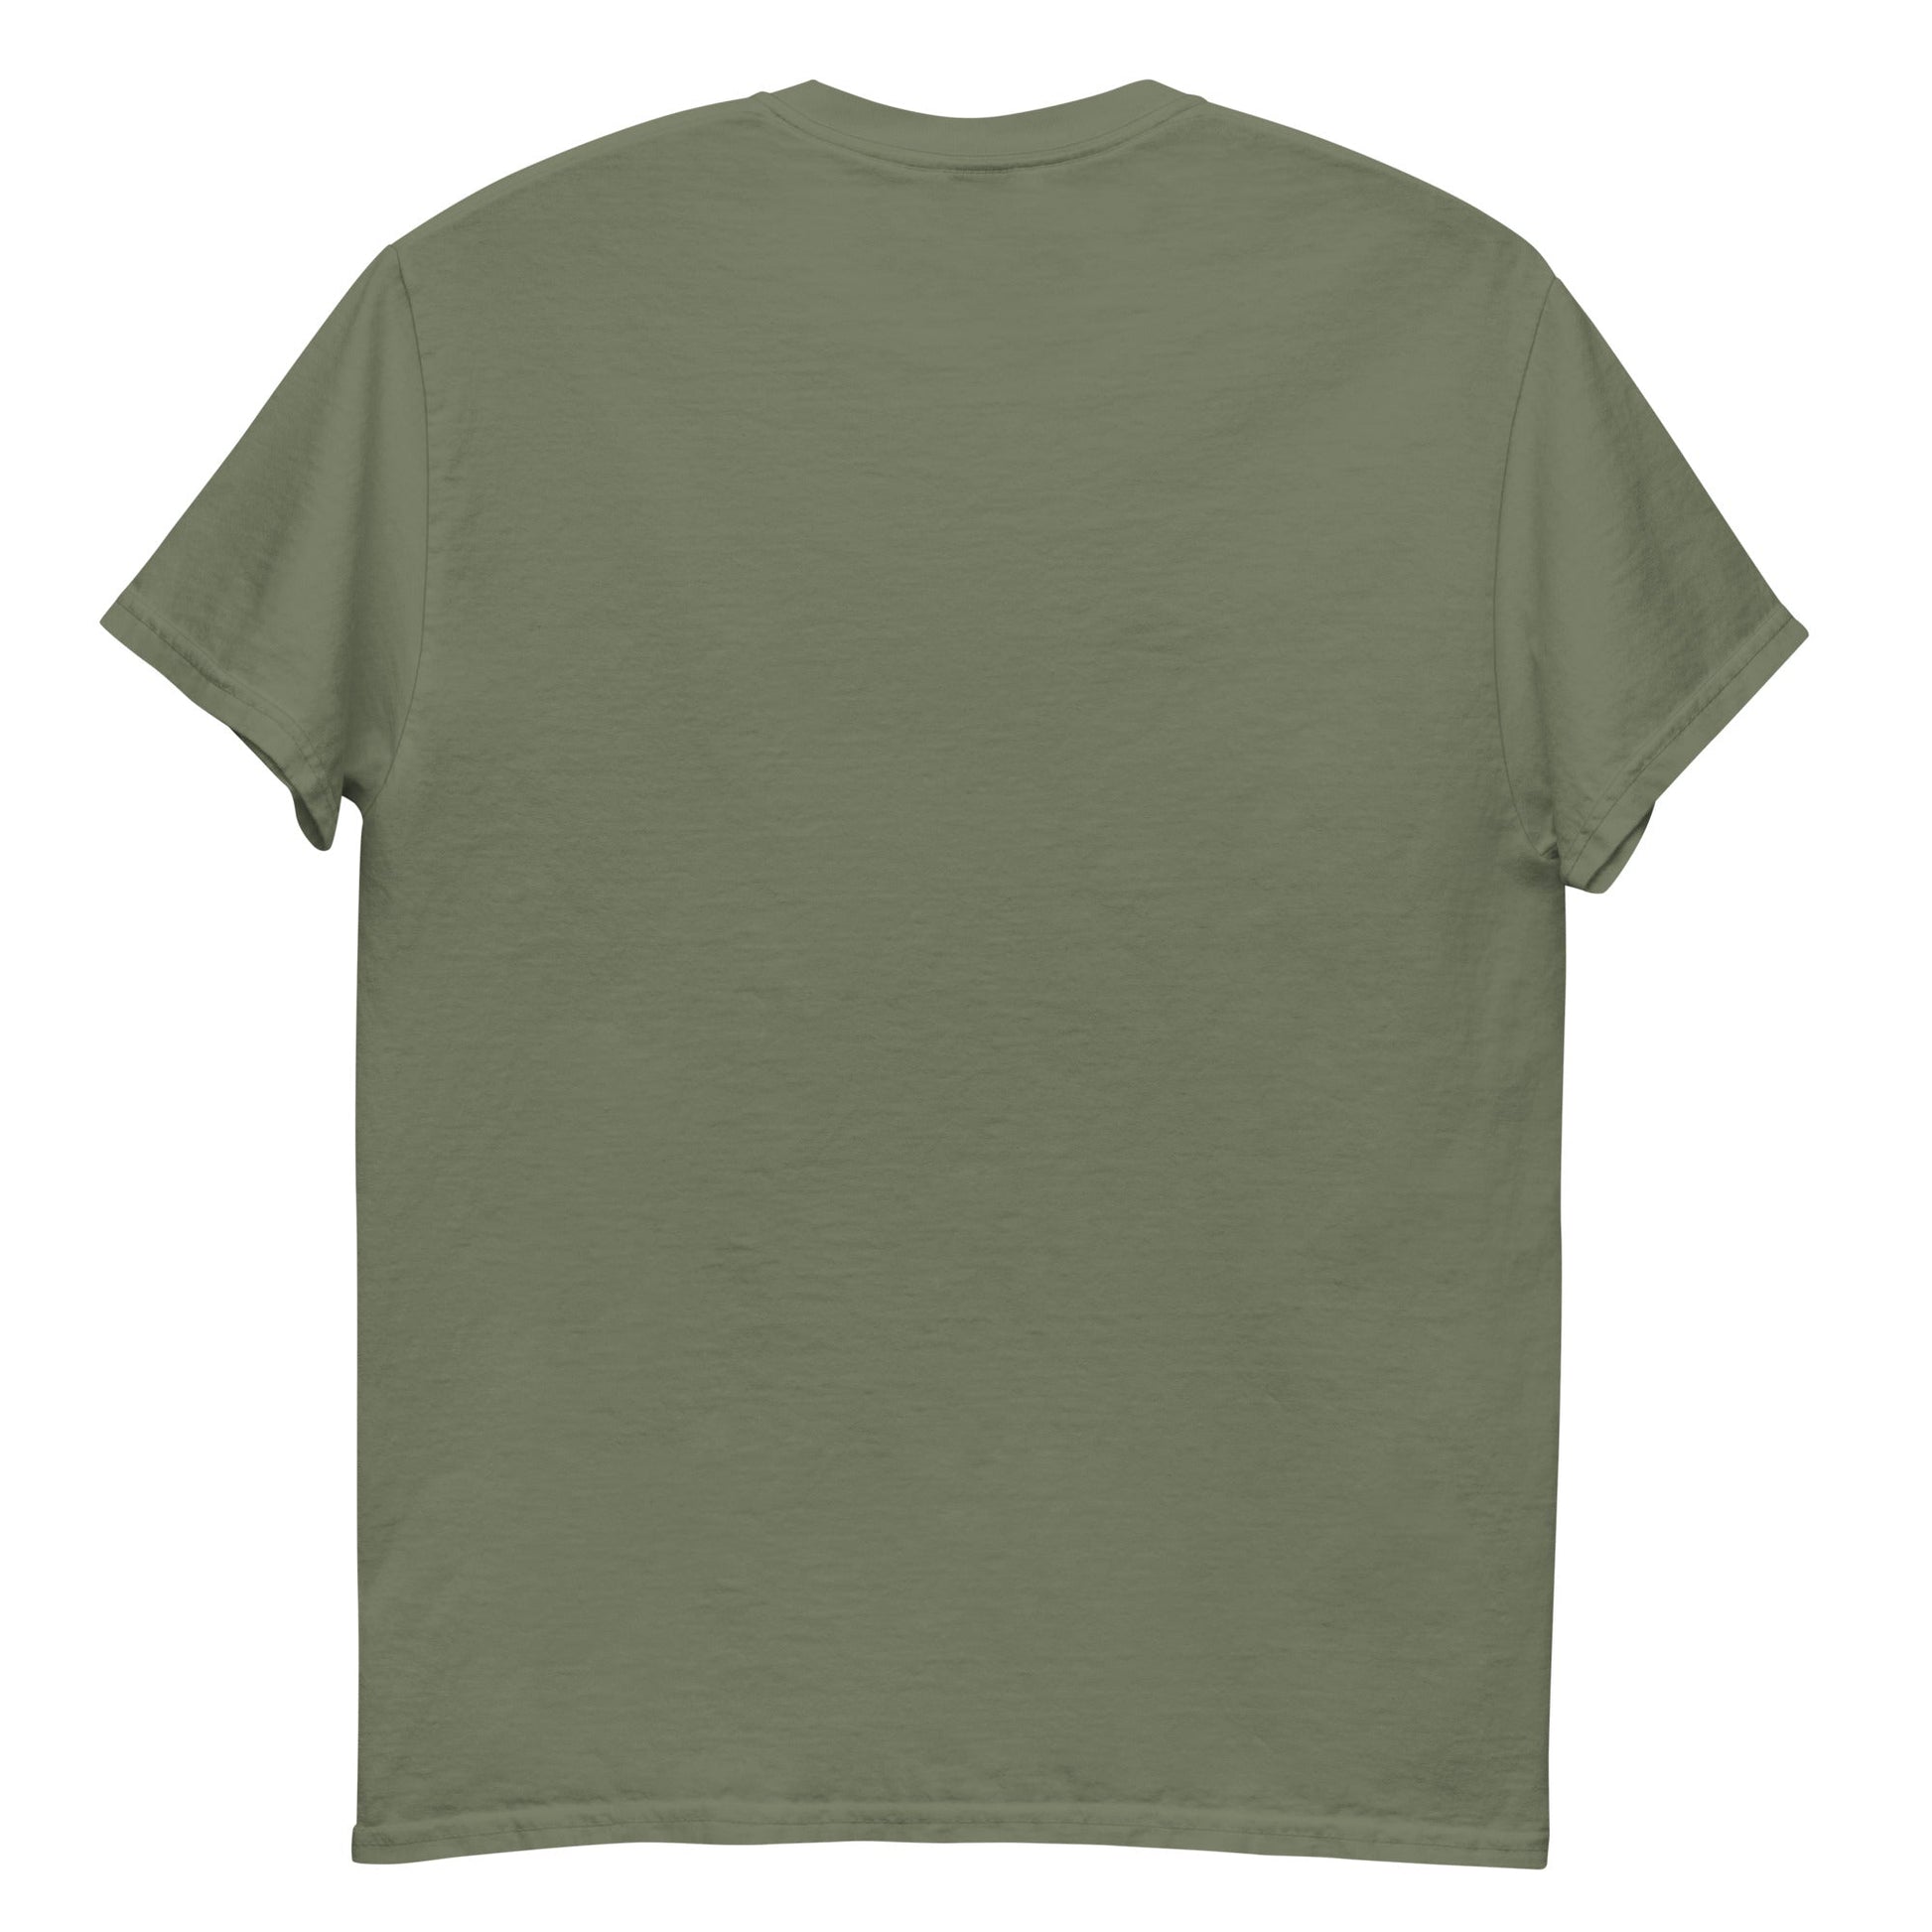 M109 Field Artillery Military T Shirt Olive Drab - Rotherhams